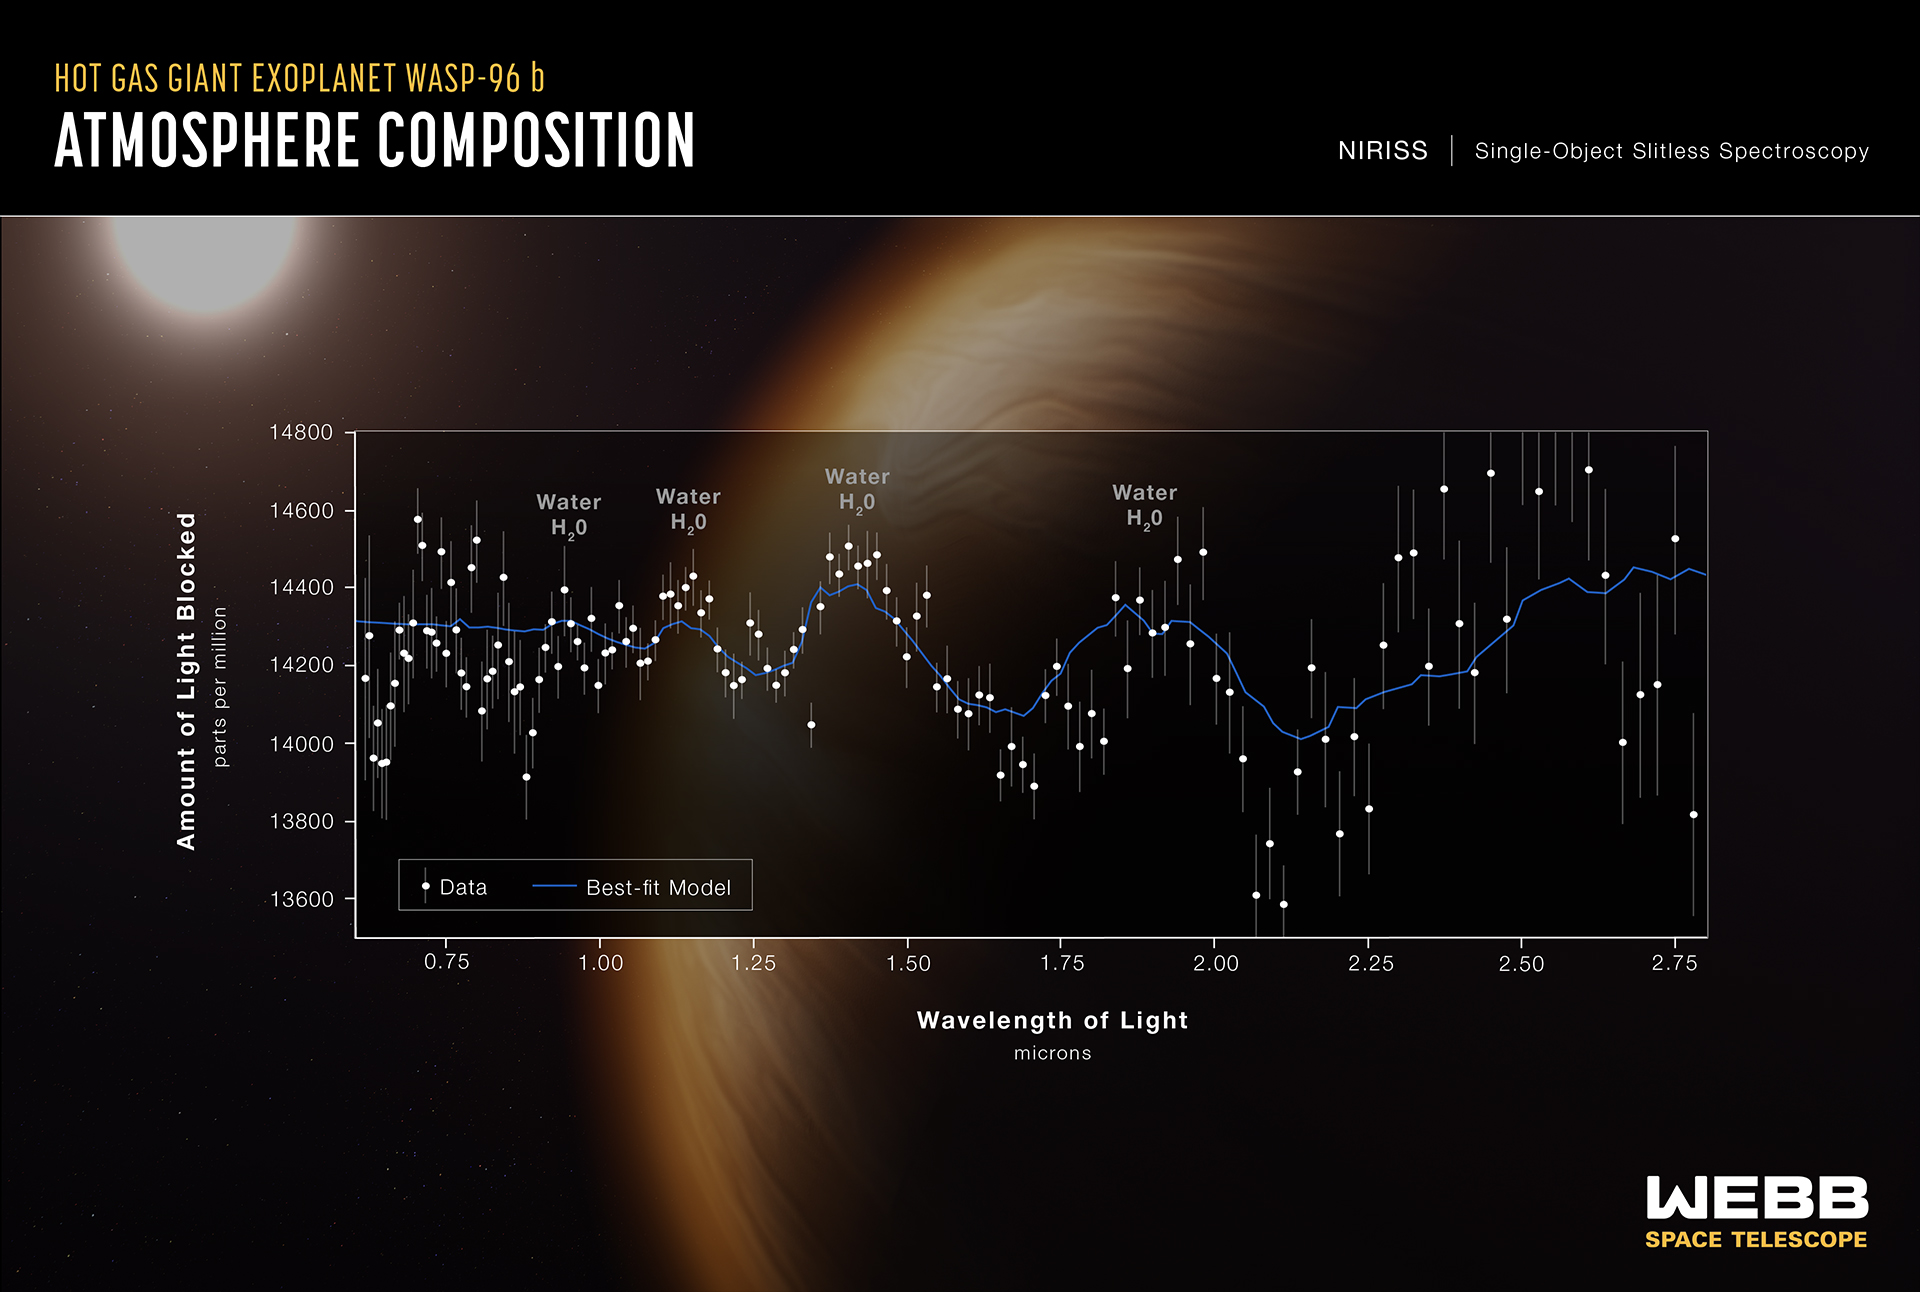 The spectrum of the exoplanet WASP-96b’s atmosphere captured by the Canadian instrument NIRISS. Source : NASA/ESA/ASC/STScI